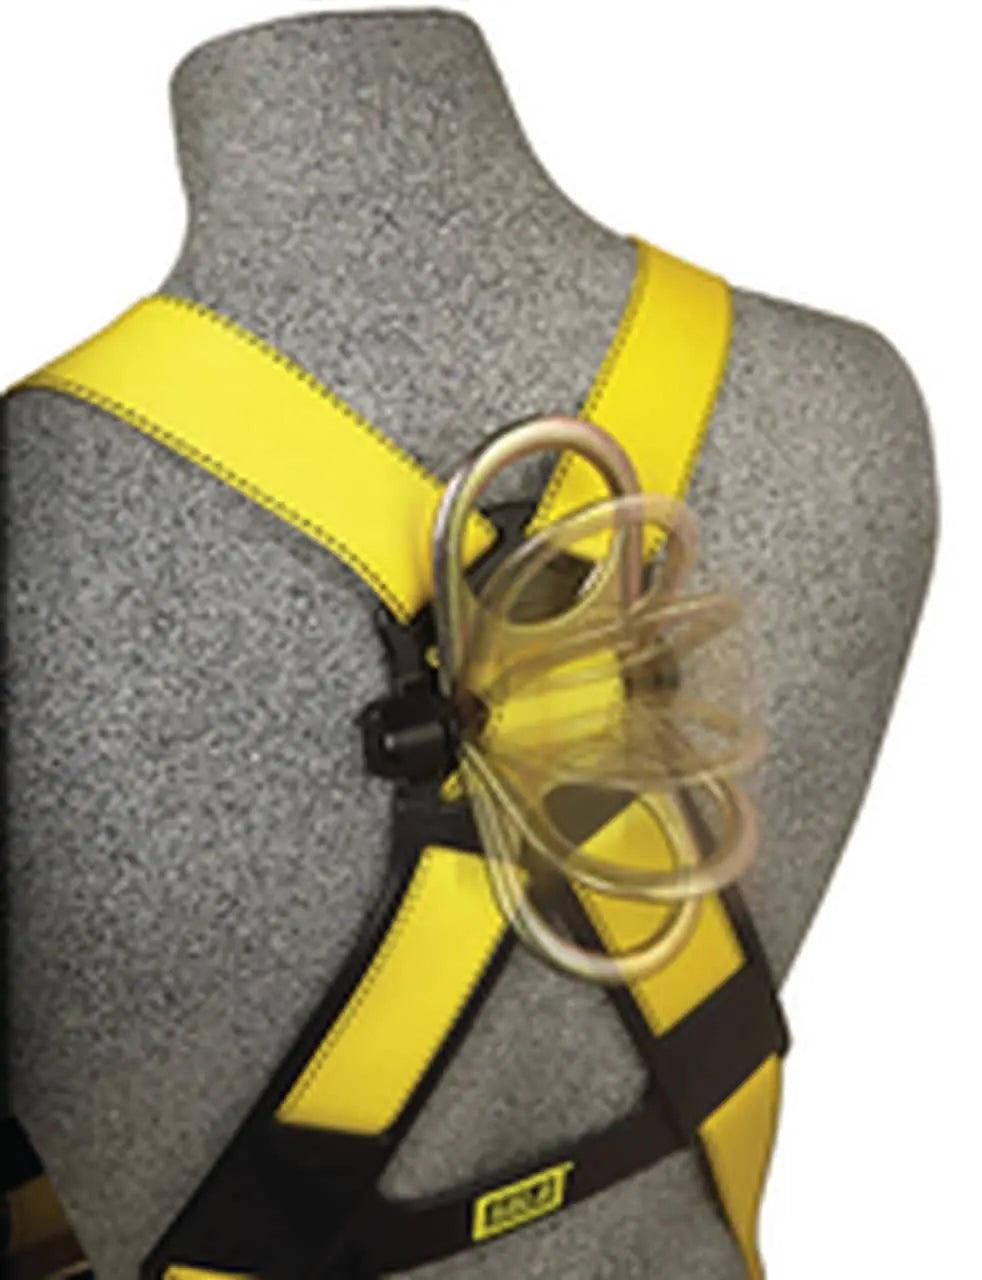 3M‚ DBI-SALA Delta‚ 4 D-Ring Construction Style Positioning/Climbing Harness - Chest Pass-Thru & Tongue Buckle Legs - Becker Safety and Supply